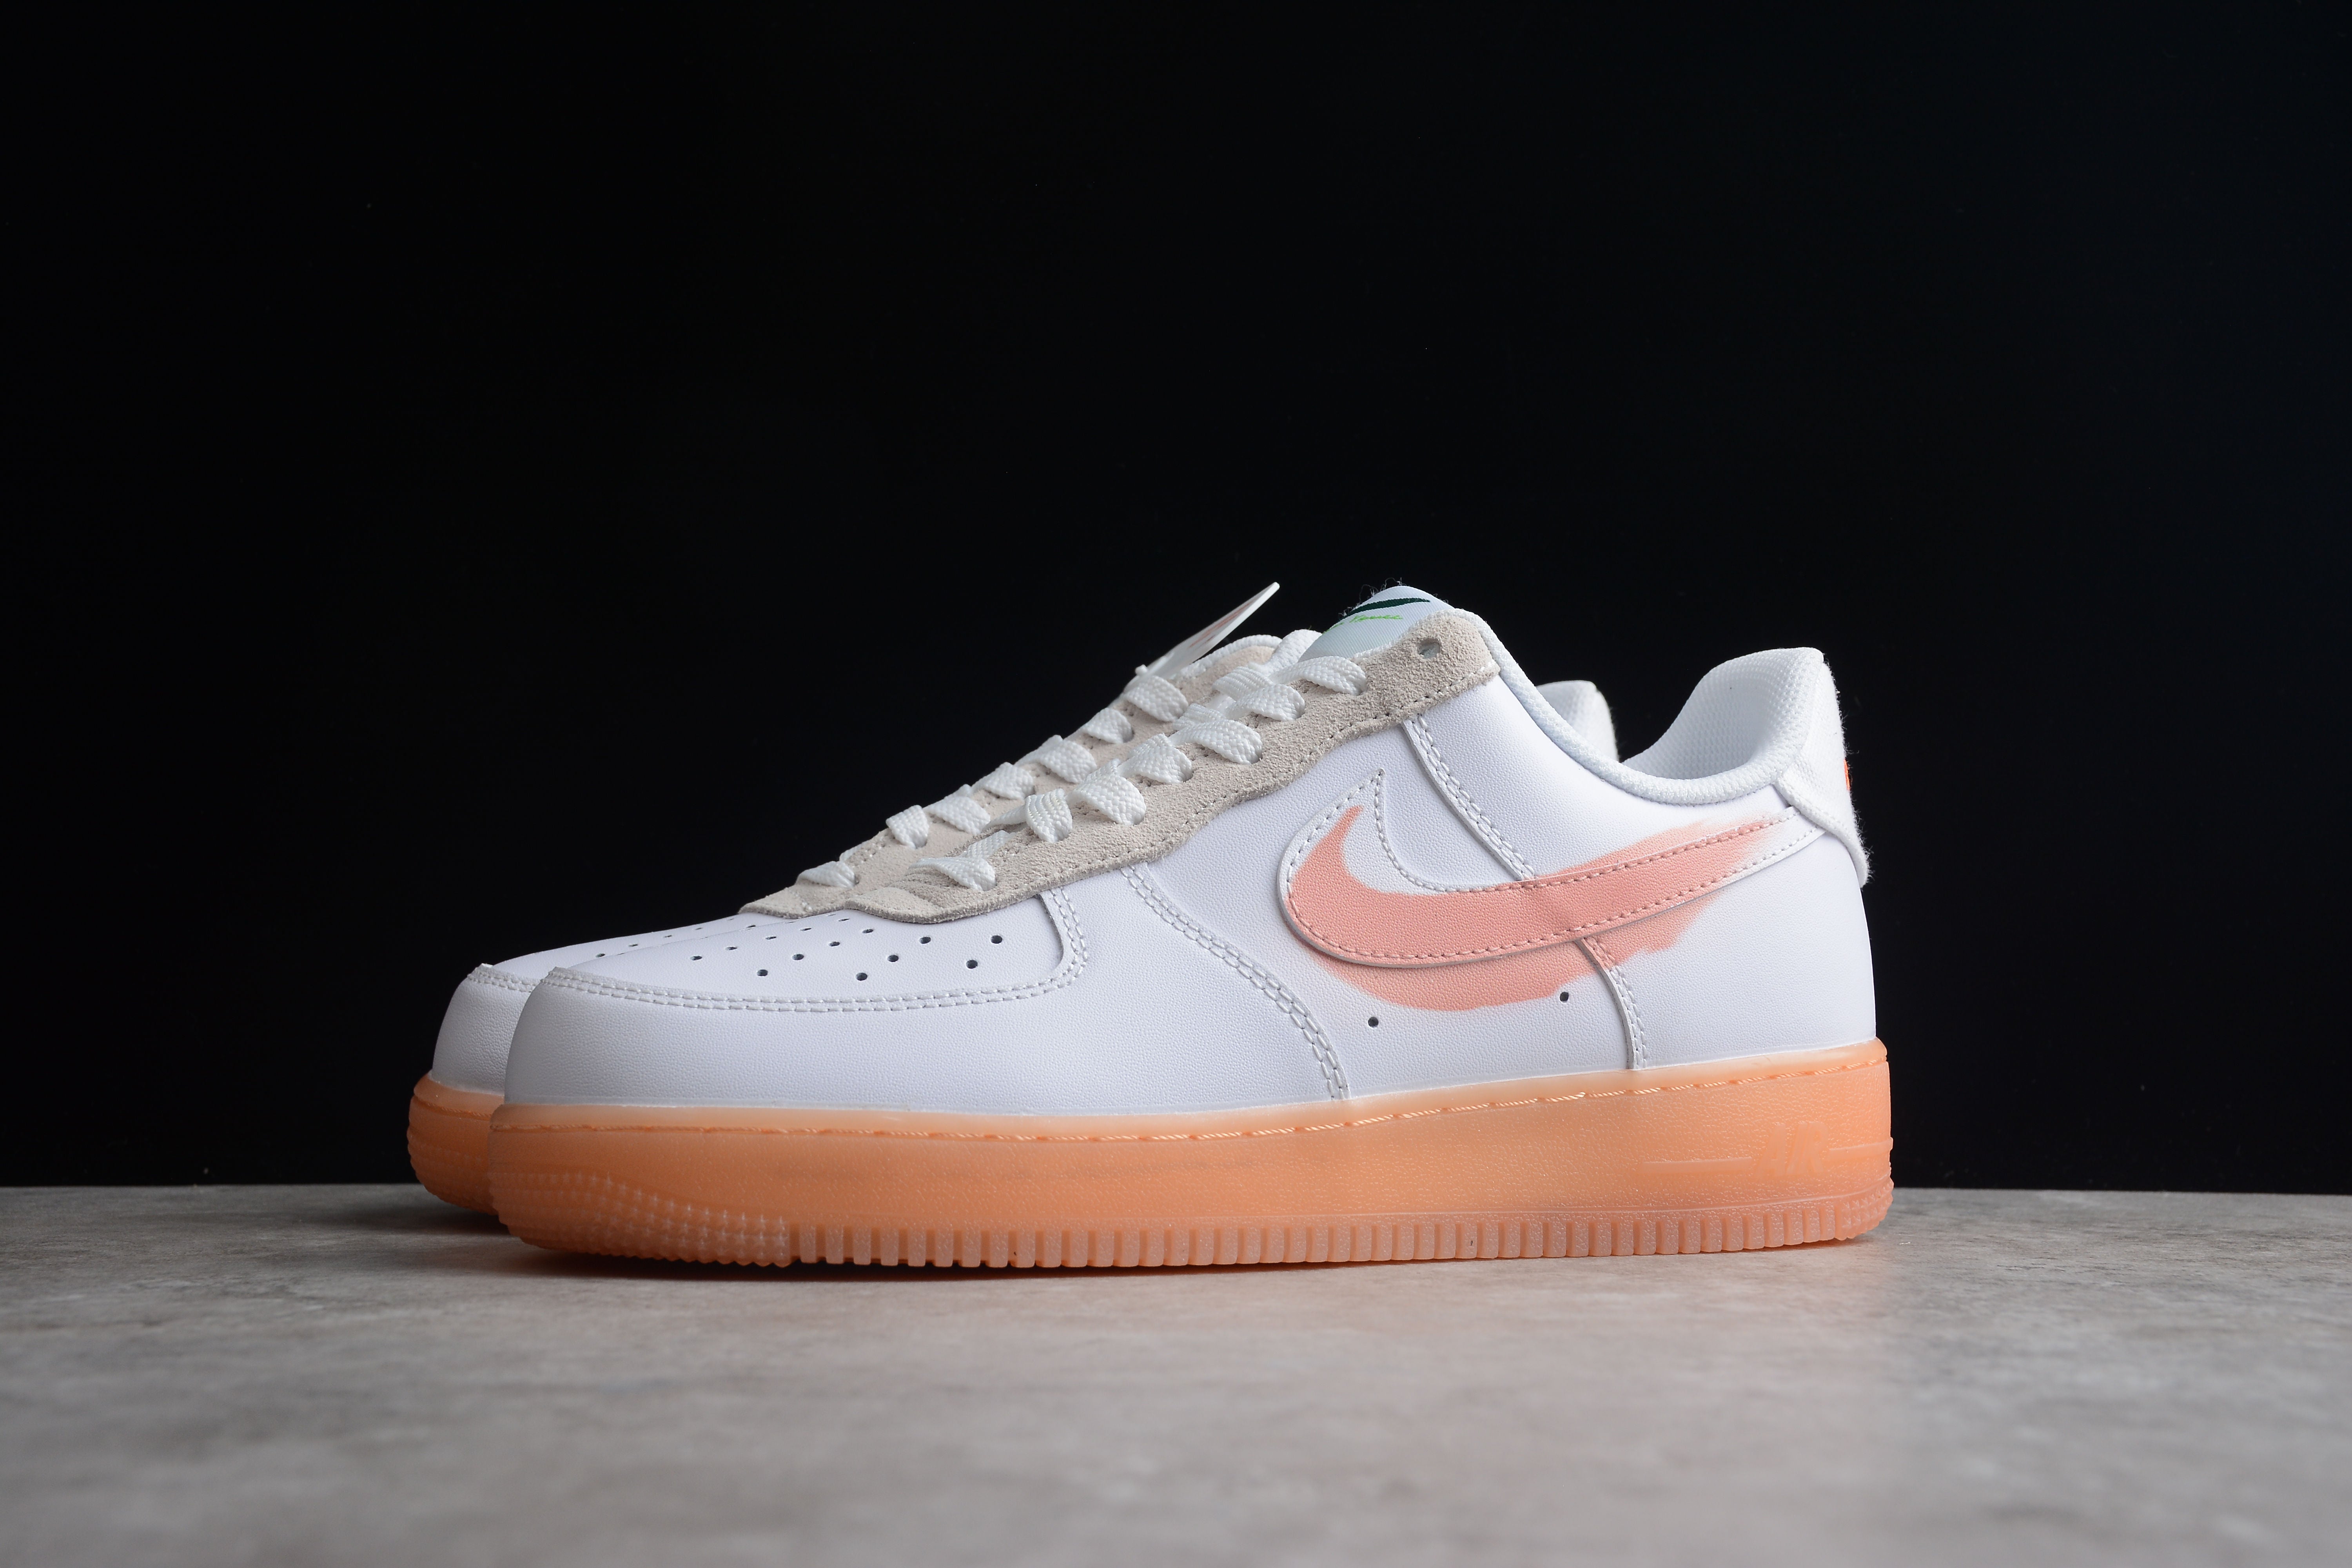 Nike airforce A1 white and orange shoes